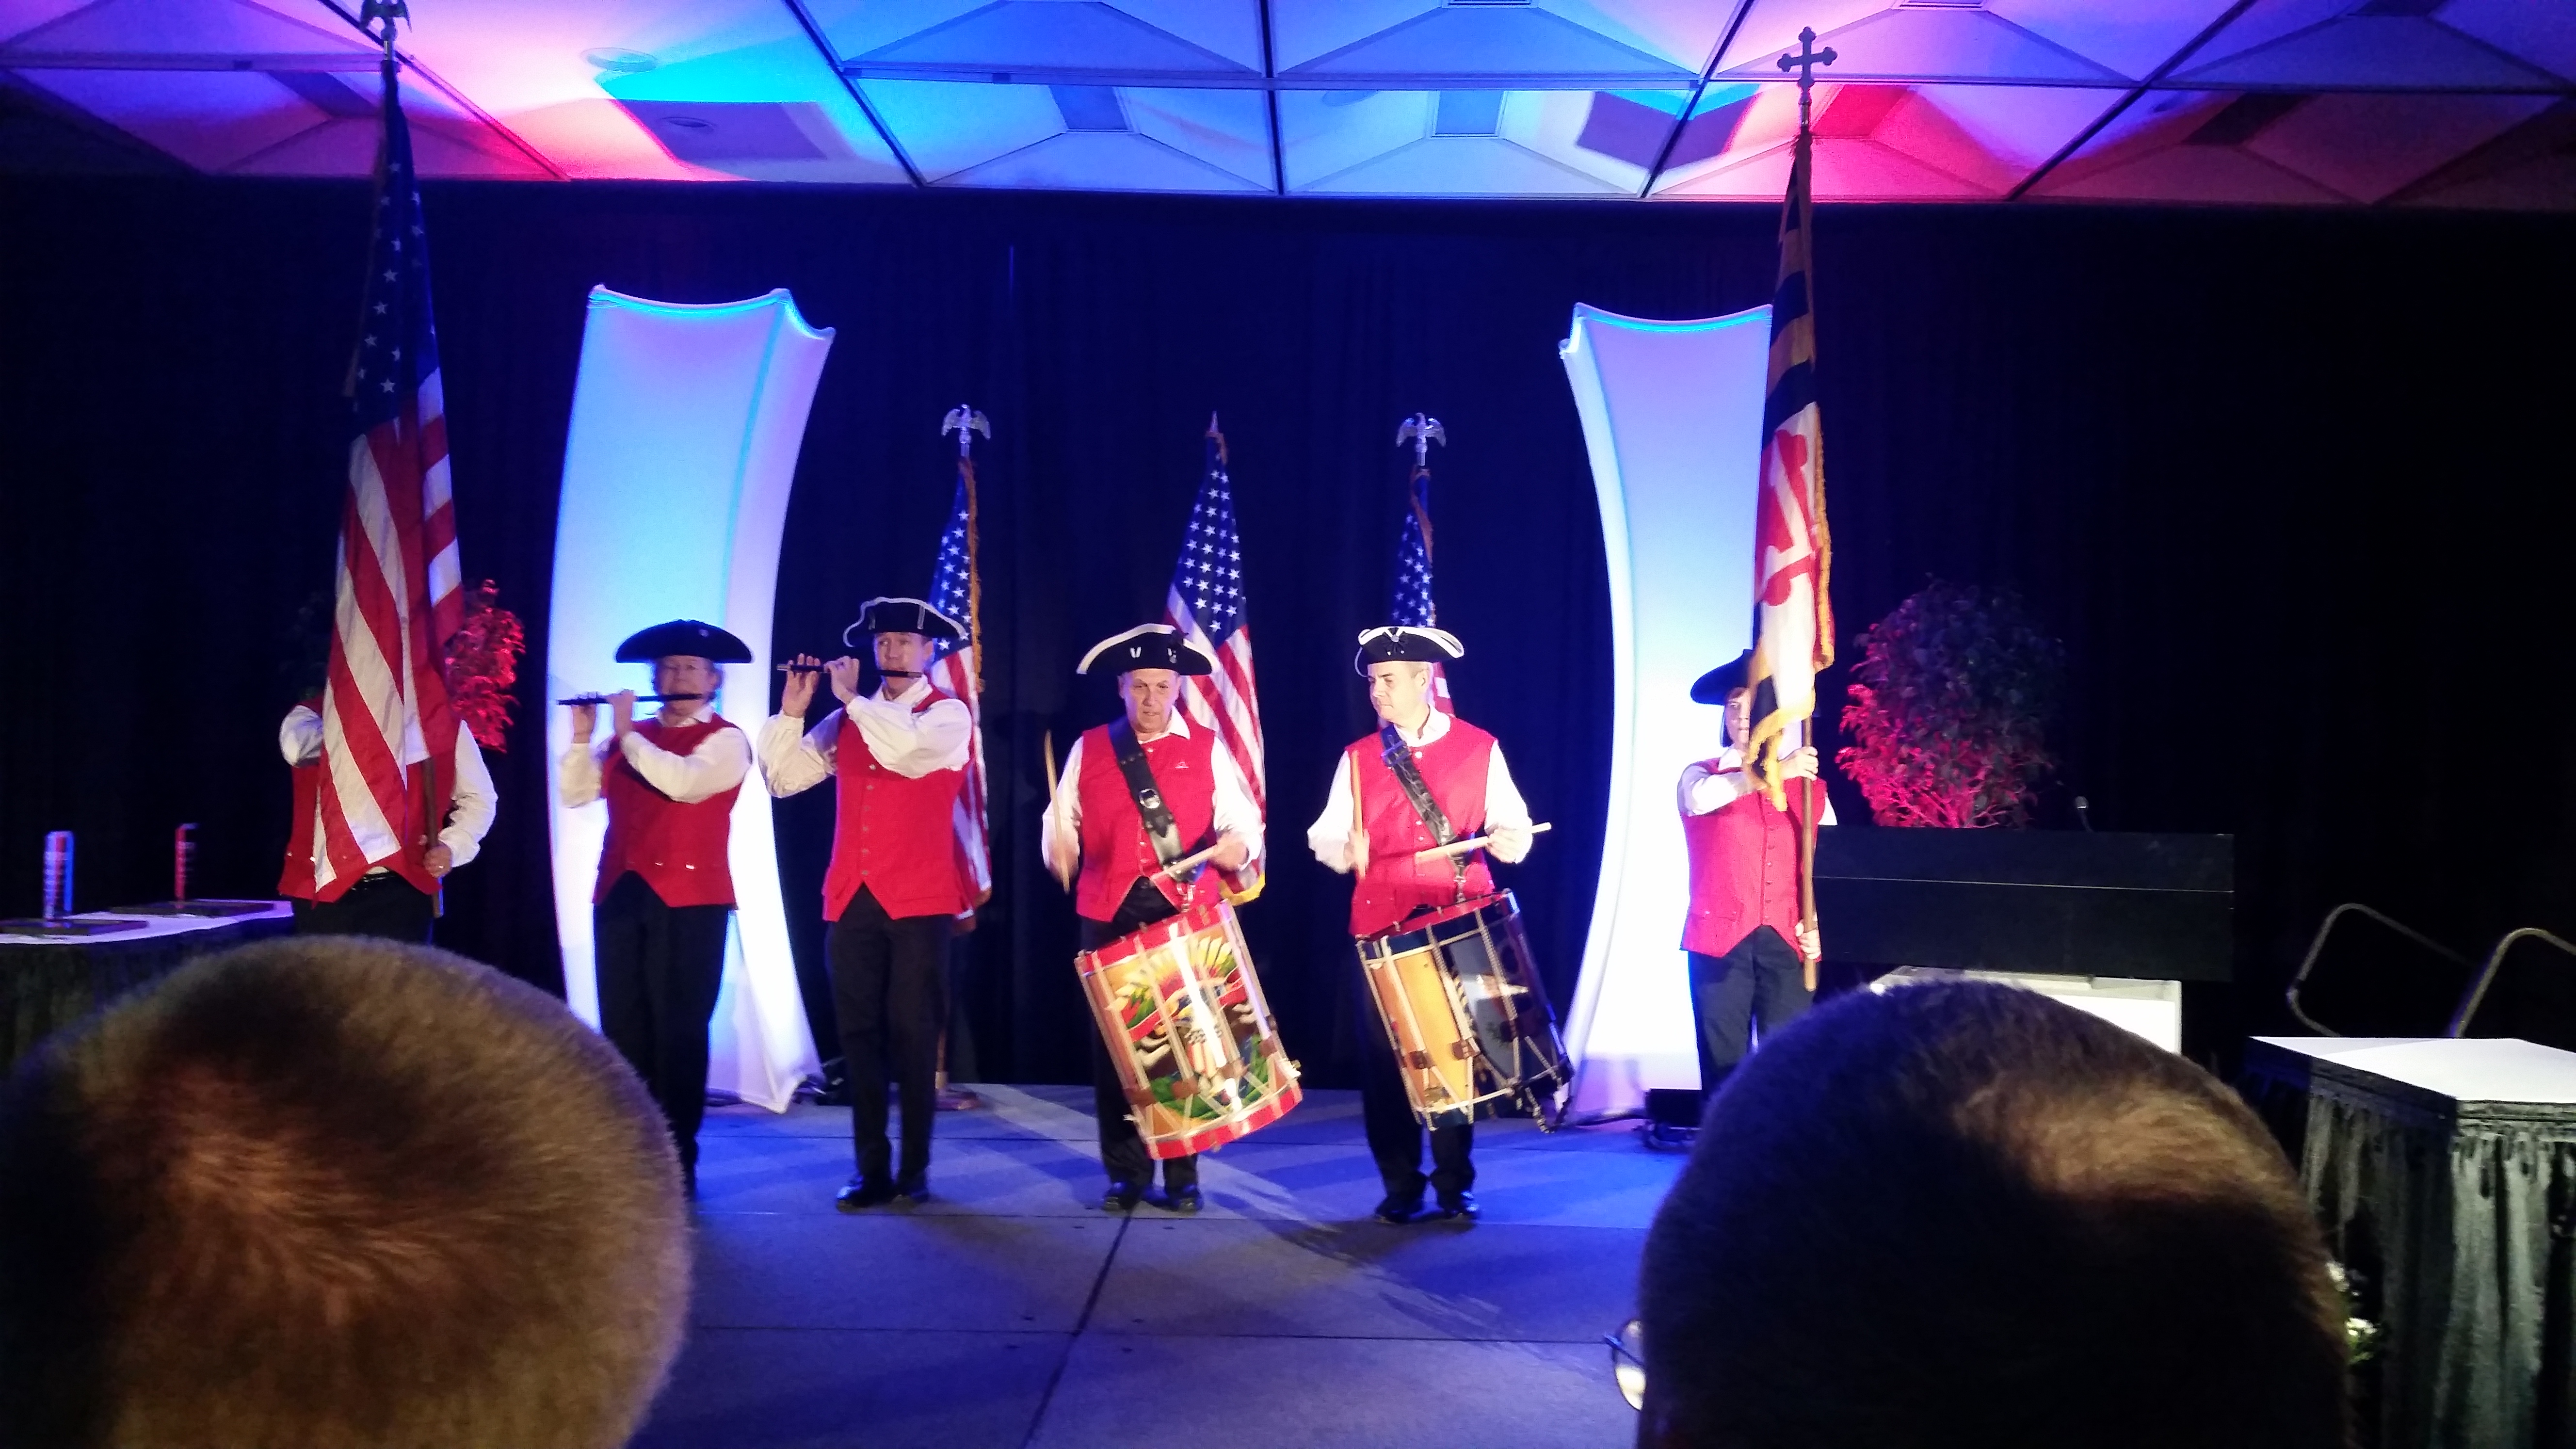 The General Session kicked off with a Star-Spangled Spectacular